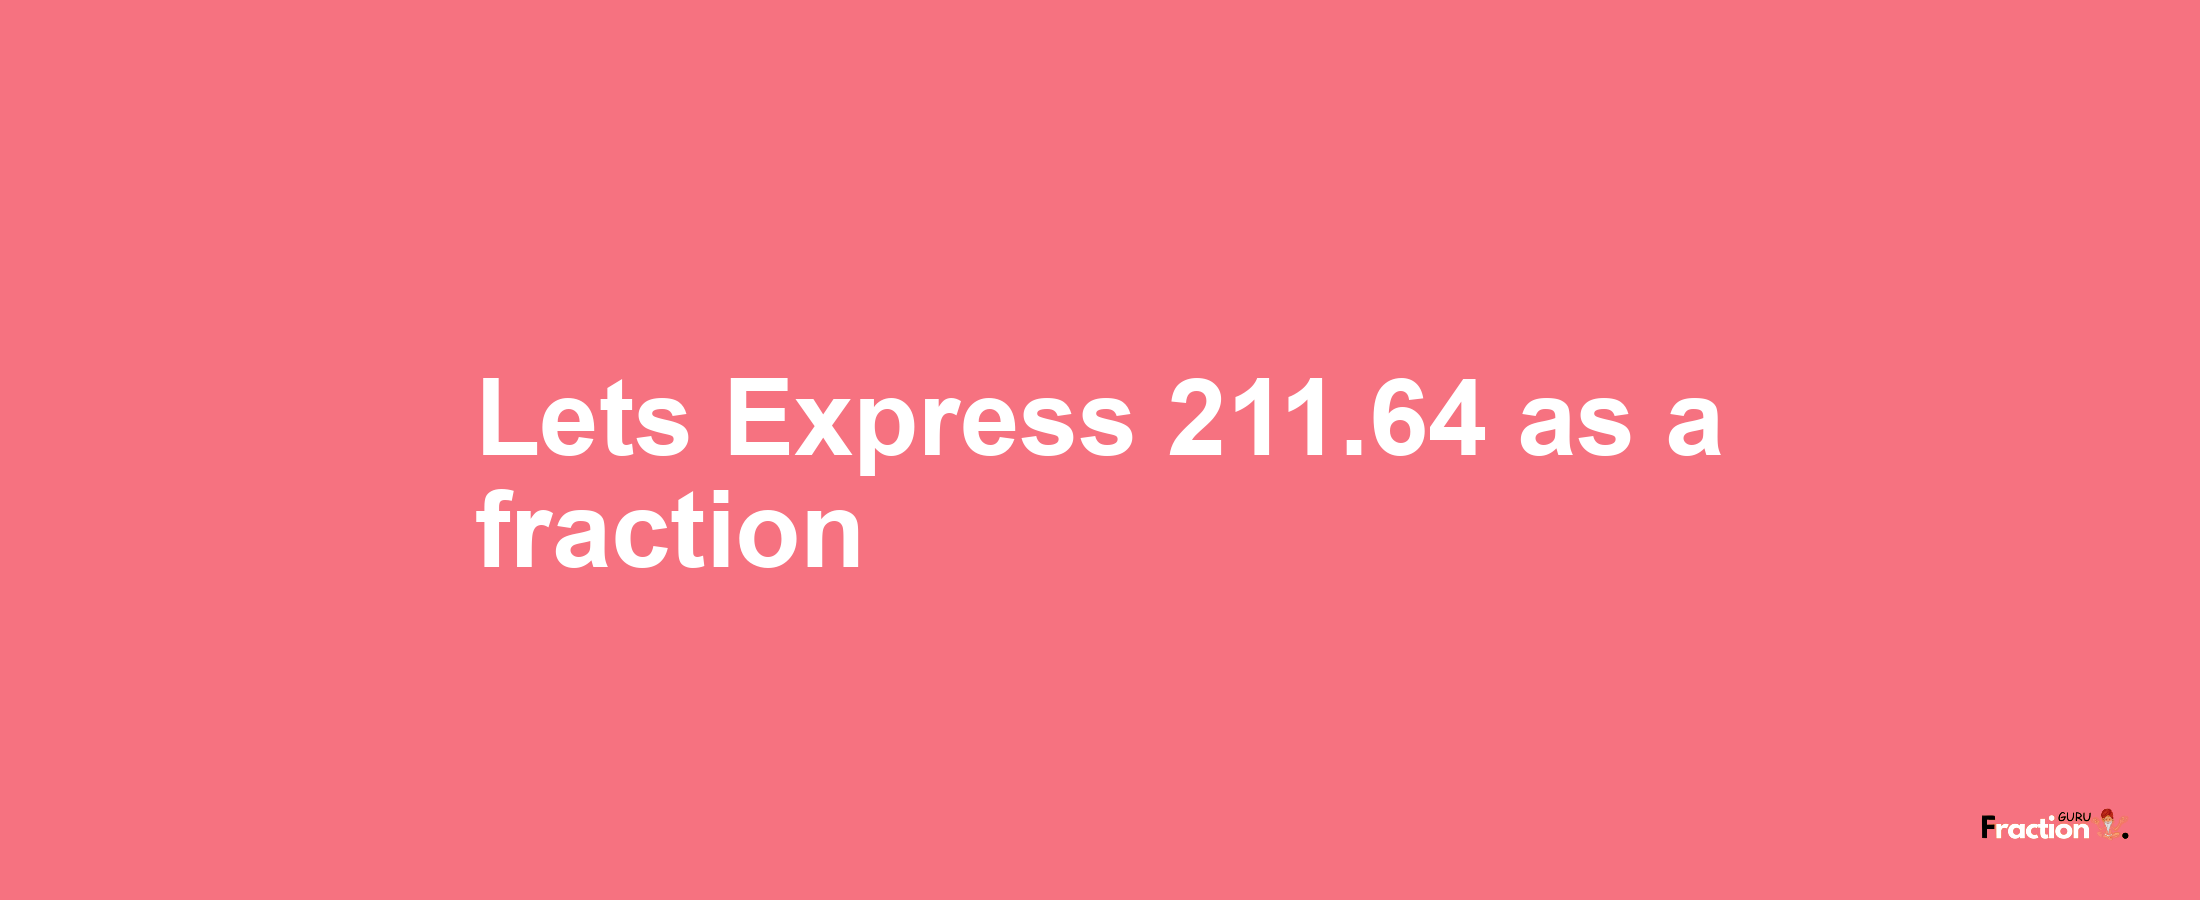 Lets Express 211.64 as afraction